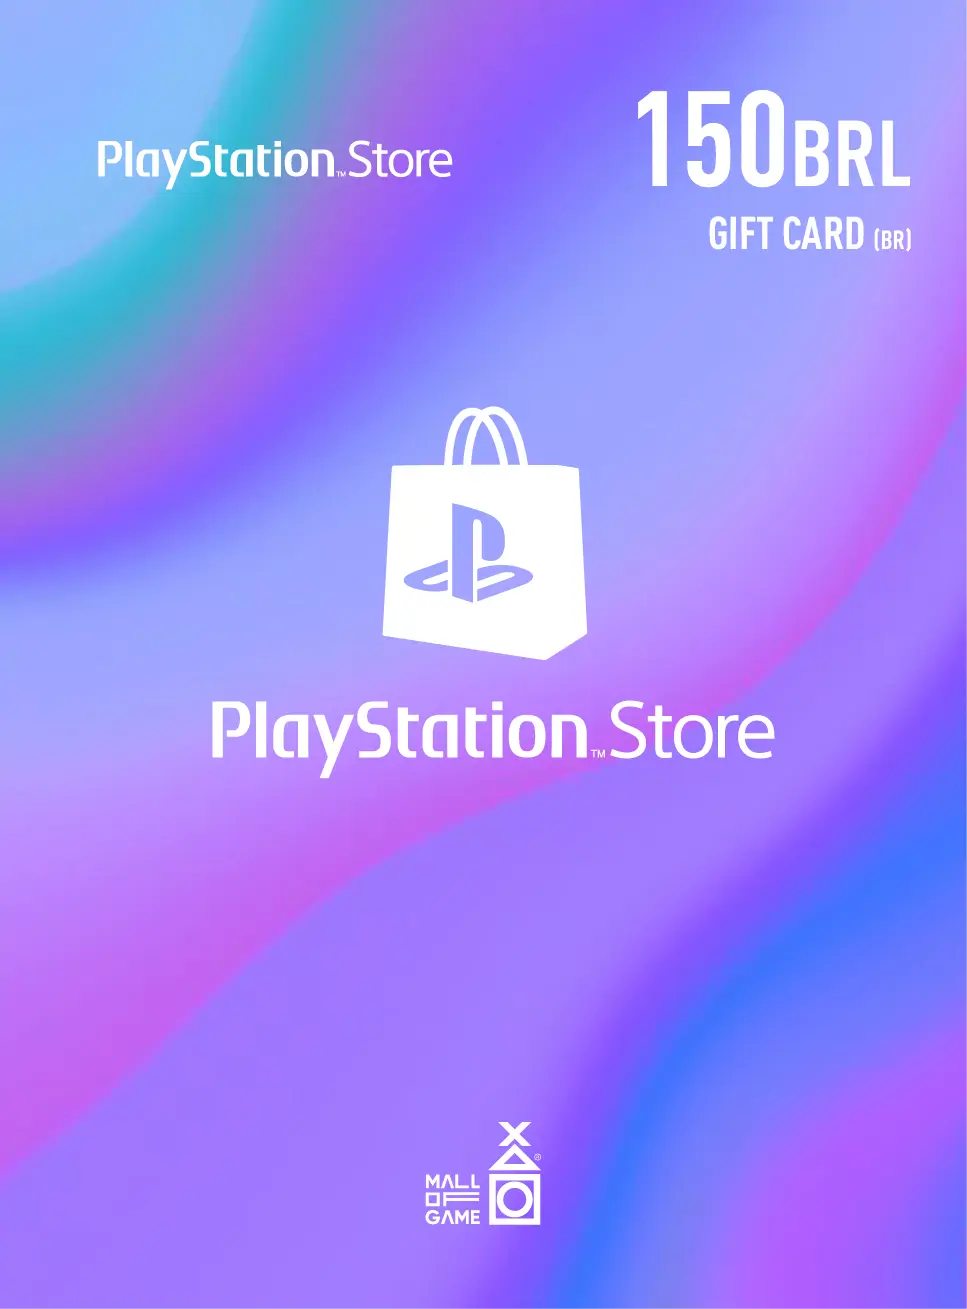 PlayStation™Store BRL150 Gift Cards (BR)